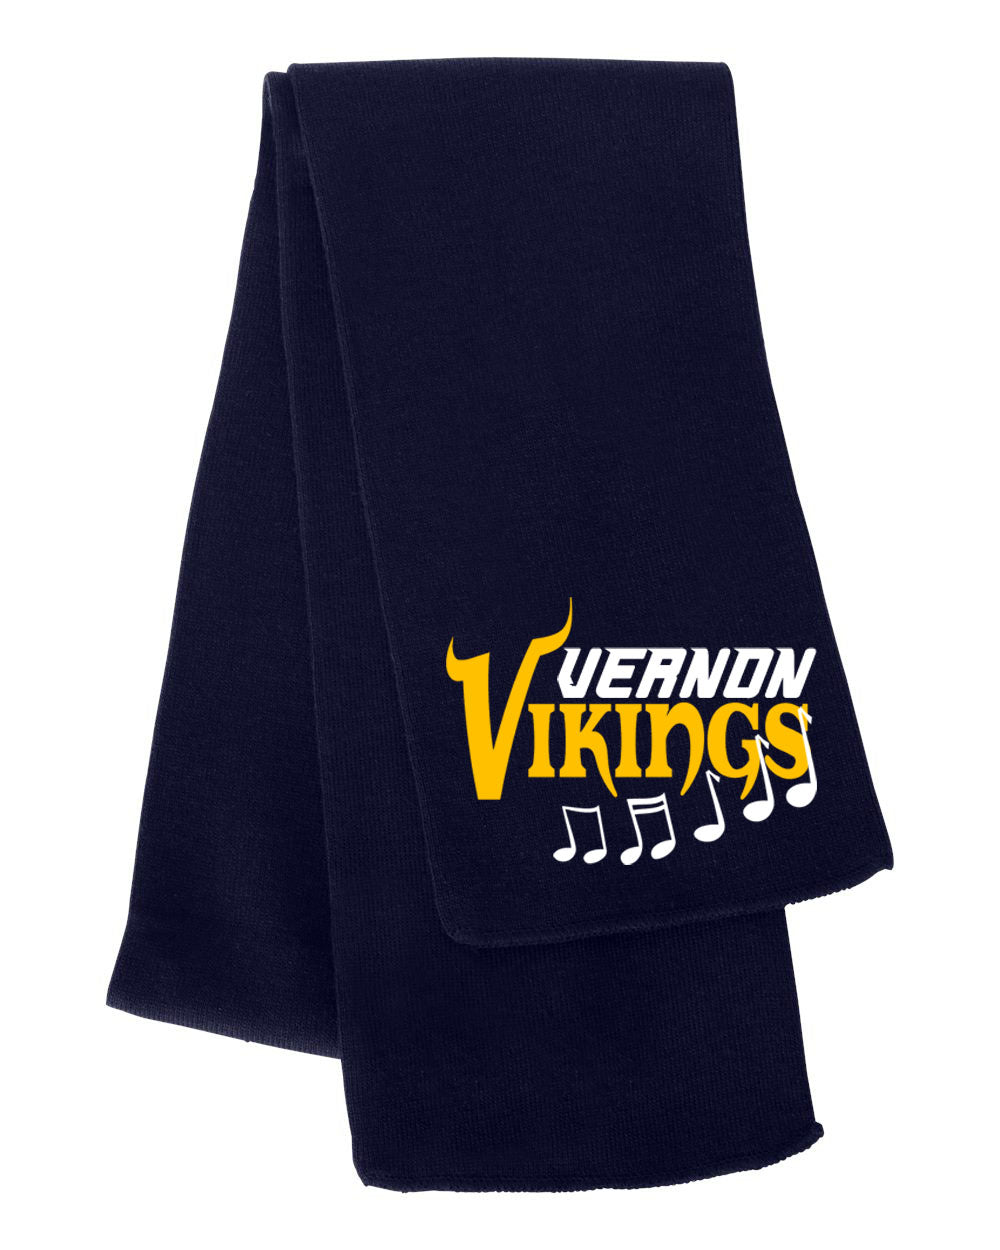 Vernon Marching Band design 2 Scarf